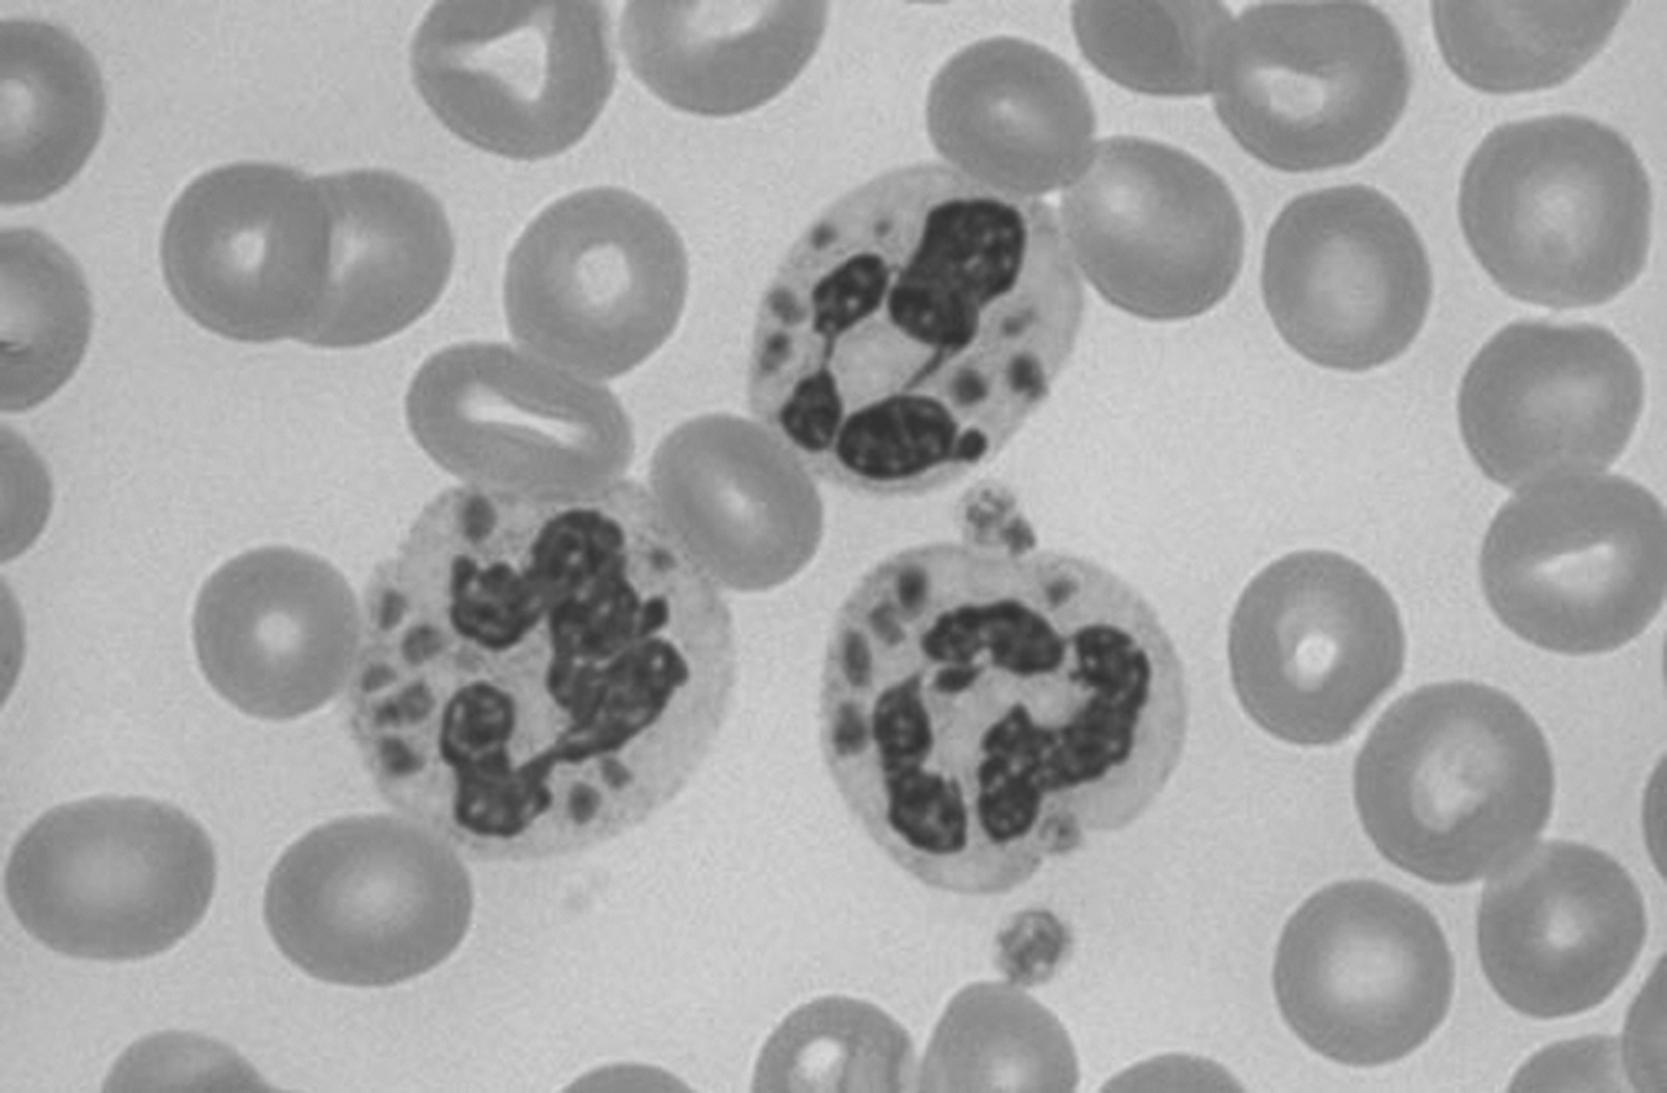 Fig. 9.5, Chédiak-Higashi syndrome, microscopic peripheral blood smear demonstrating giant lysomal granules in the white blood cells.